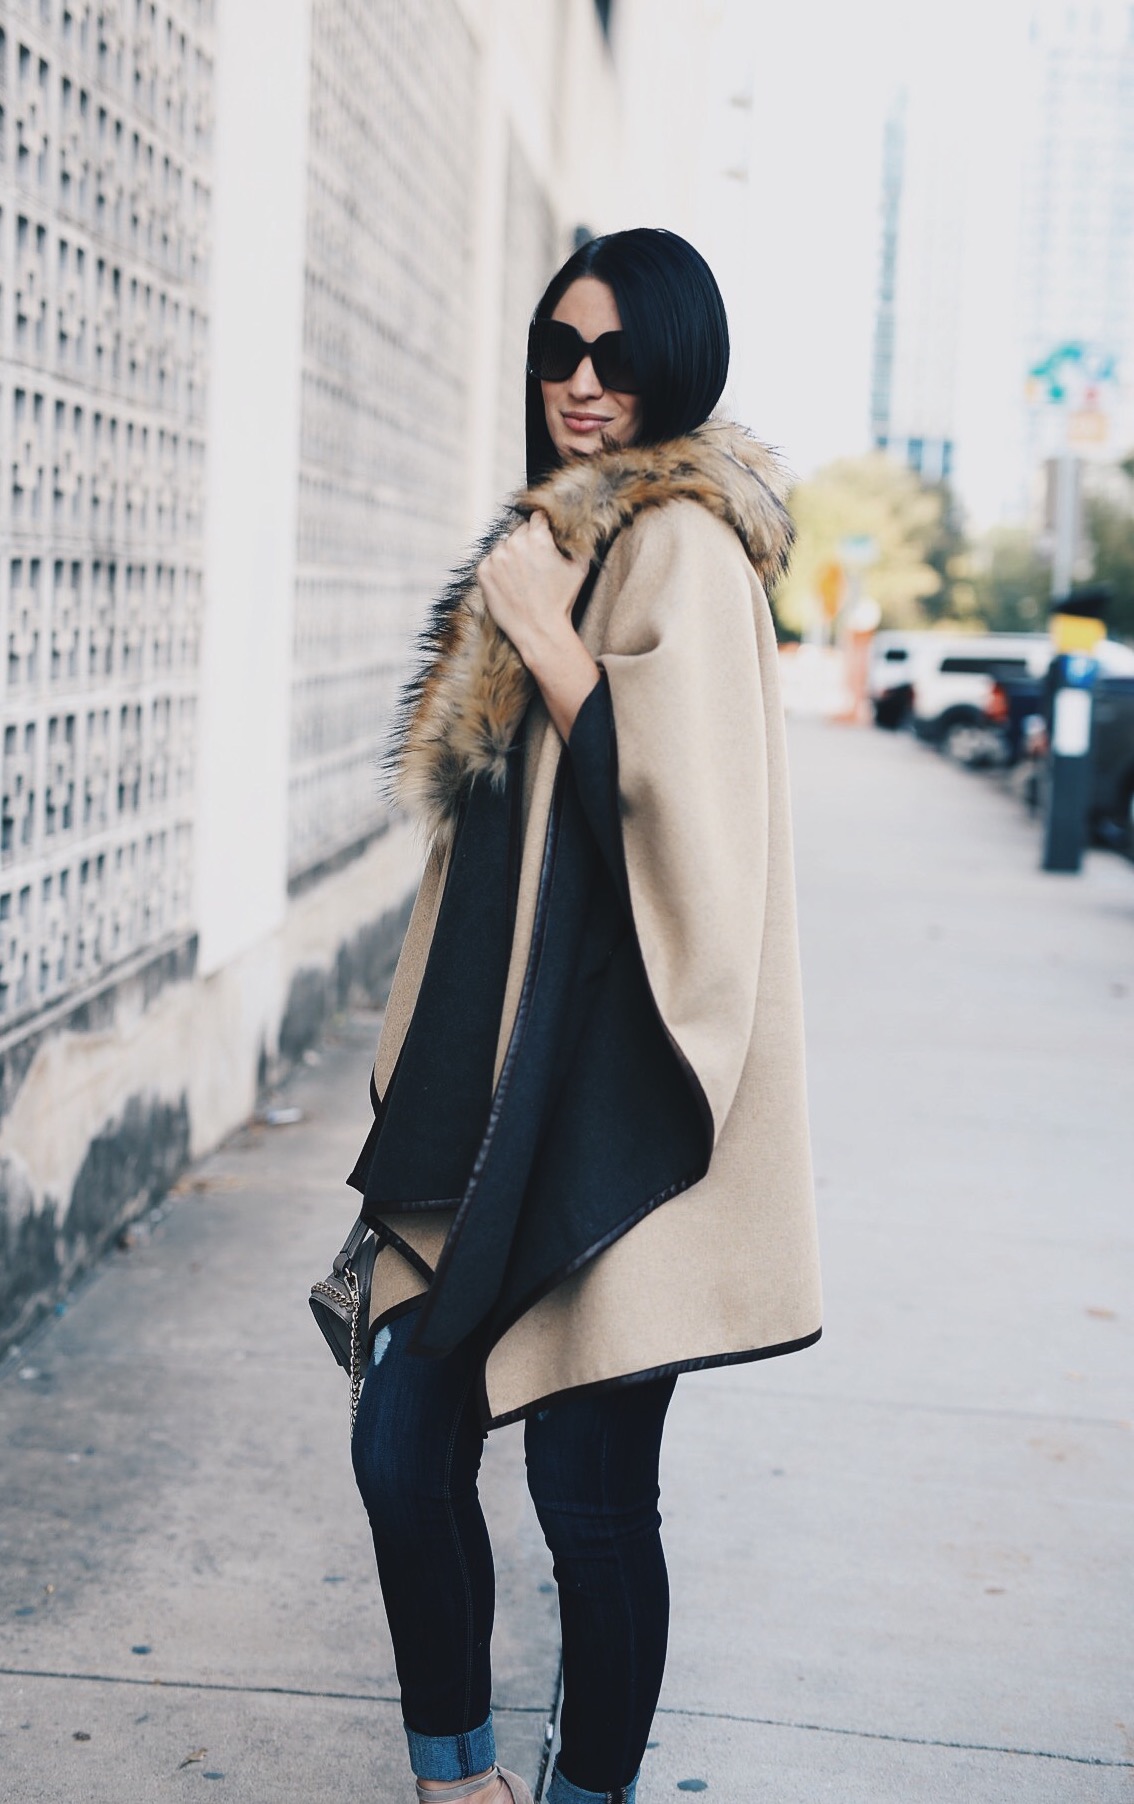 Faux Fur Cape | how to style a fur cape | how to wear a fur cape | faux fur fashion | styling faux fur | fall fashion tips | fall outfit ideas | fall style tips | what to wear for fall | cool weather fashion | fashion for fall | style tips for fall | outfit ideas for fall || Dressed to Kill #fauxfur #capestyle #furcape